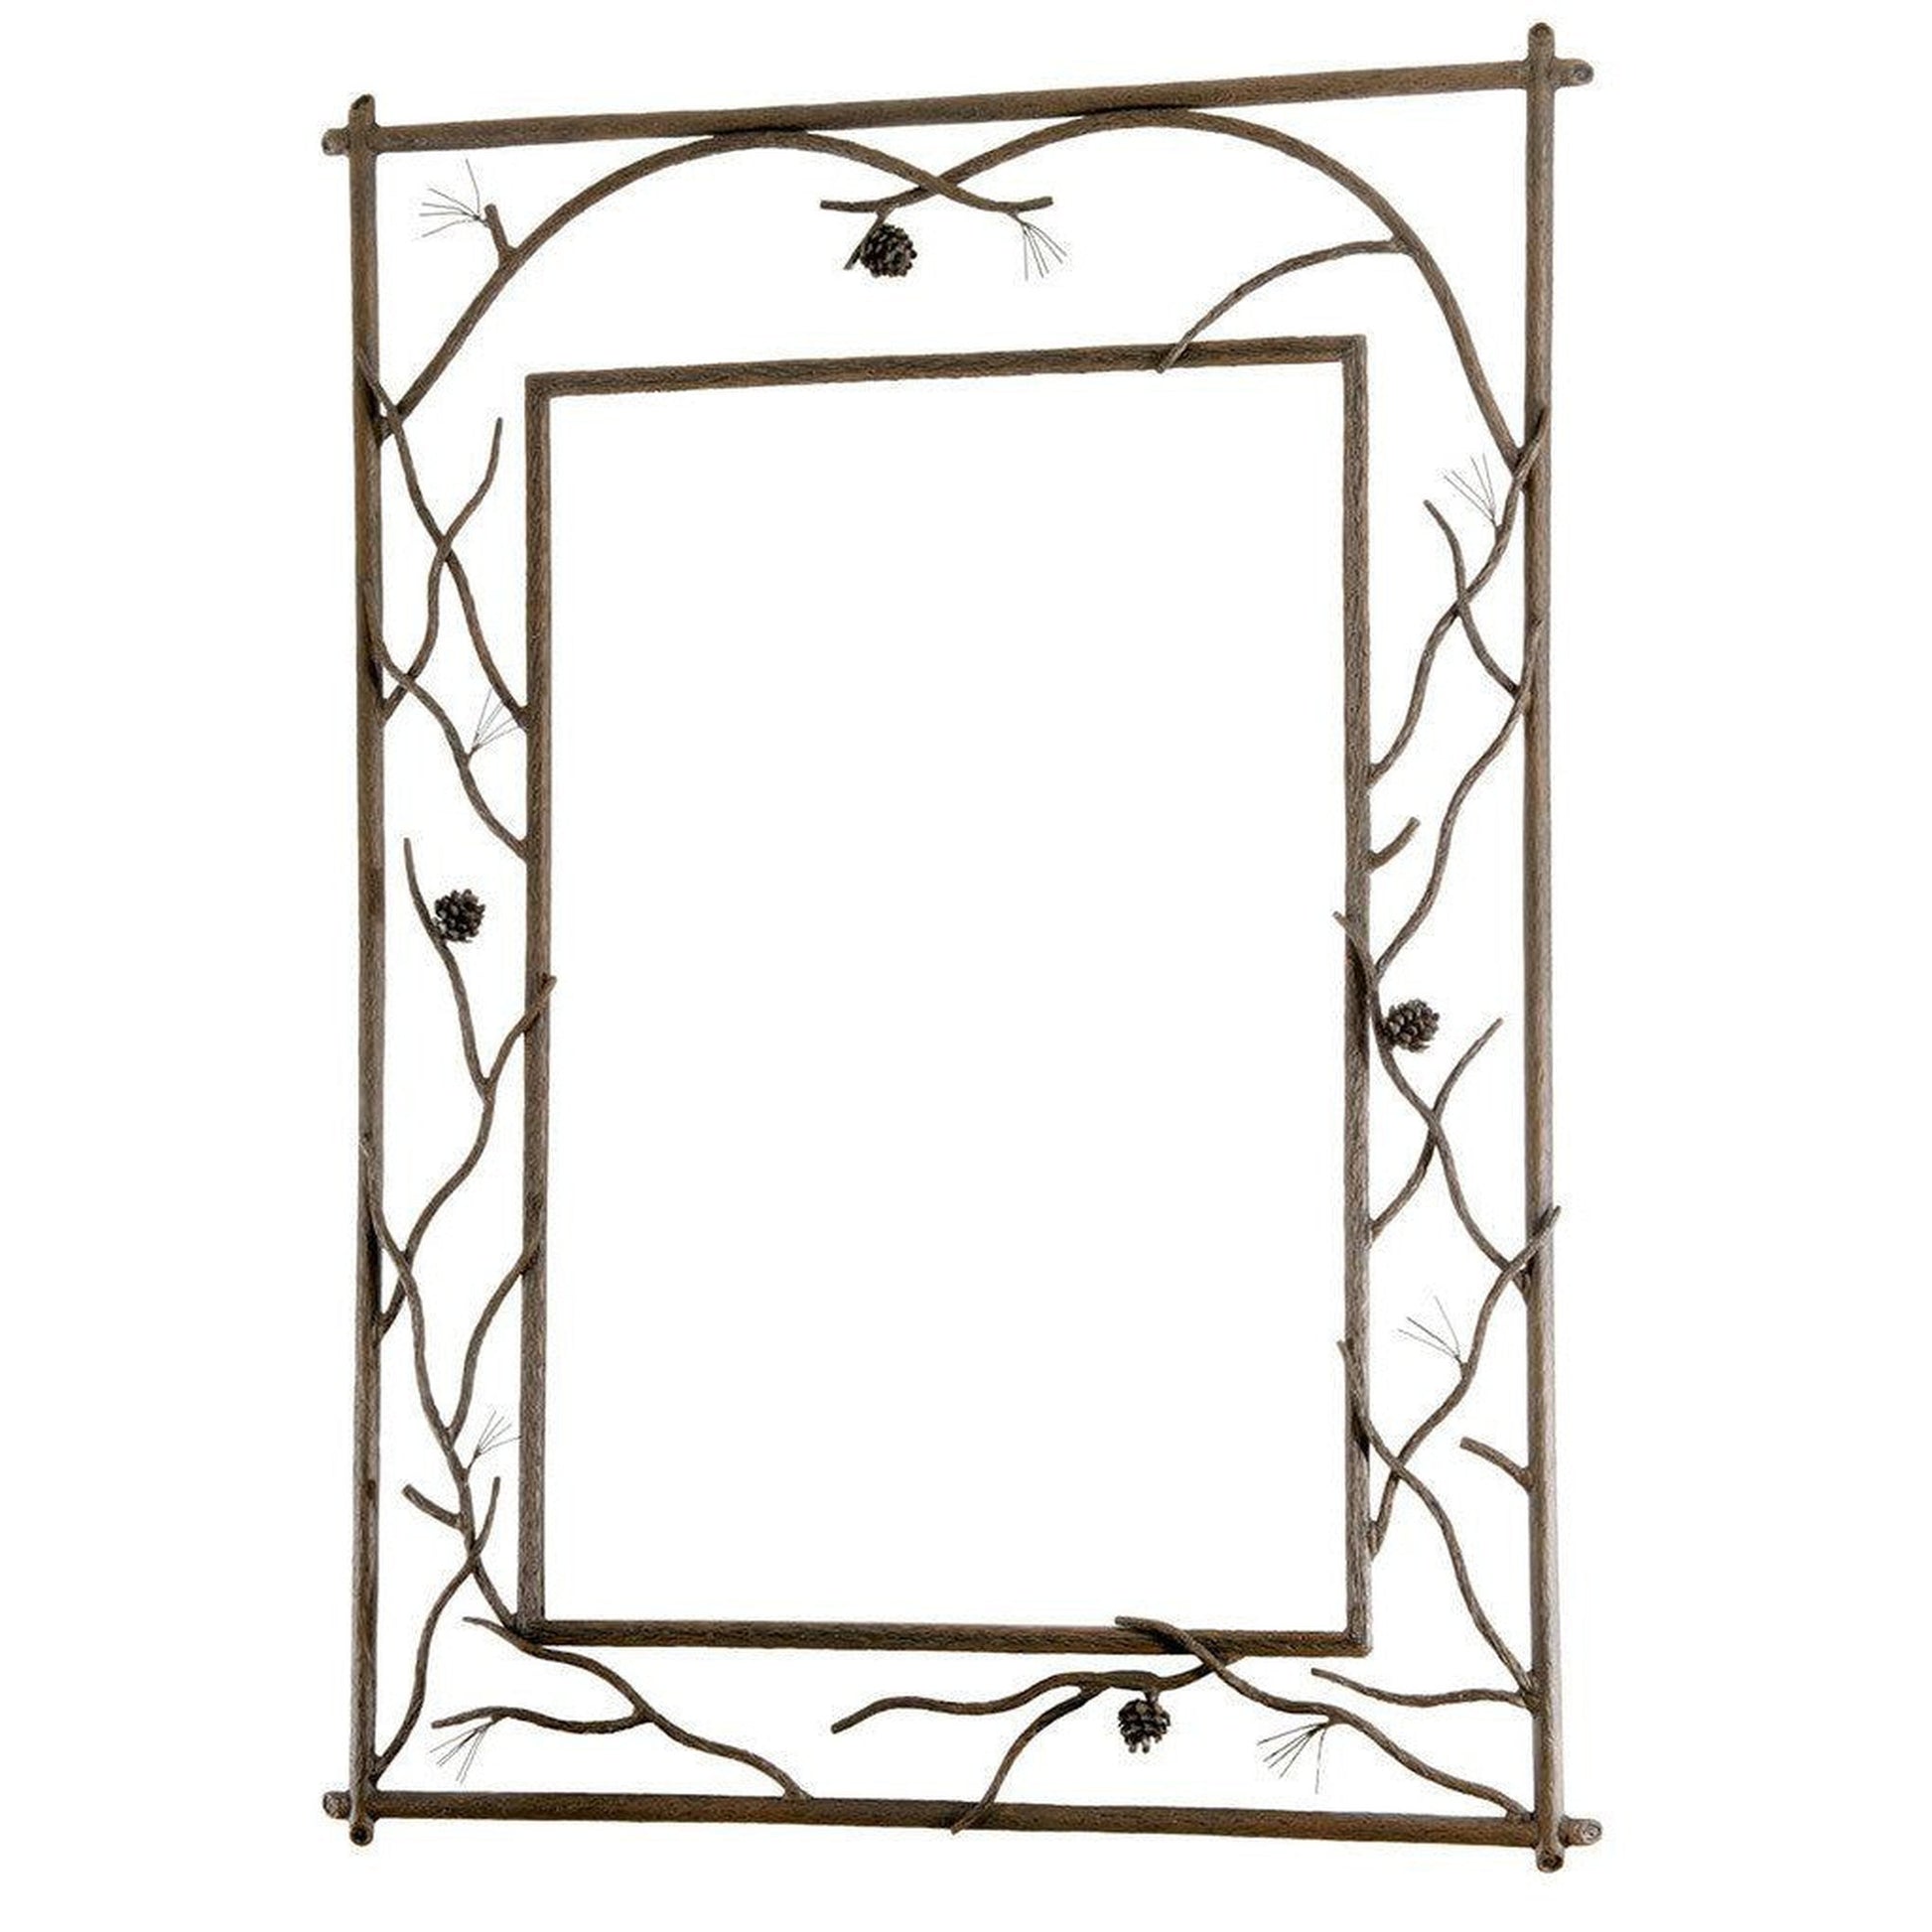 Stone County Ironworks Pine 37" x 51" Large Hand Rubbed Ivory Branched Iron Wall Mirror With Copper Iron Accent